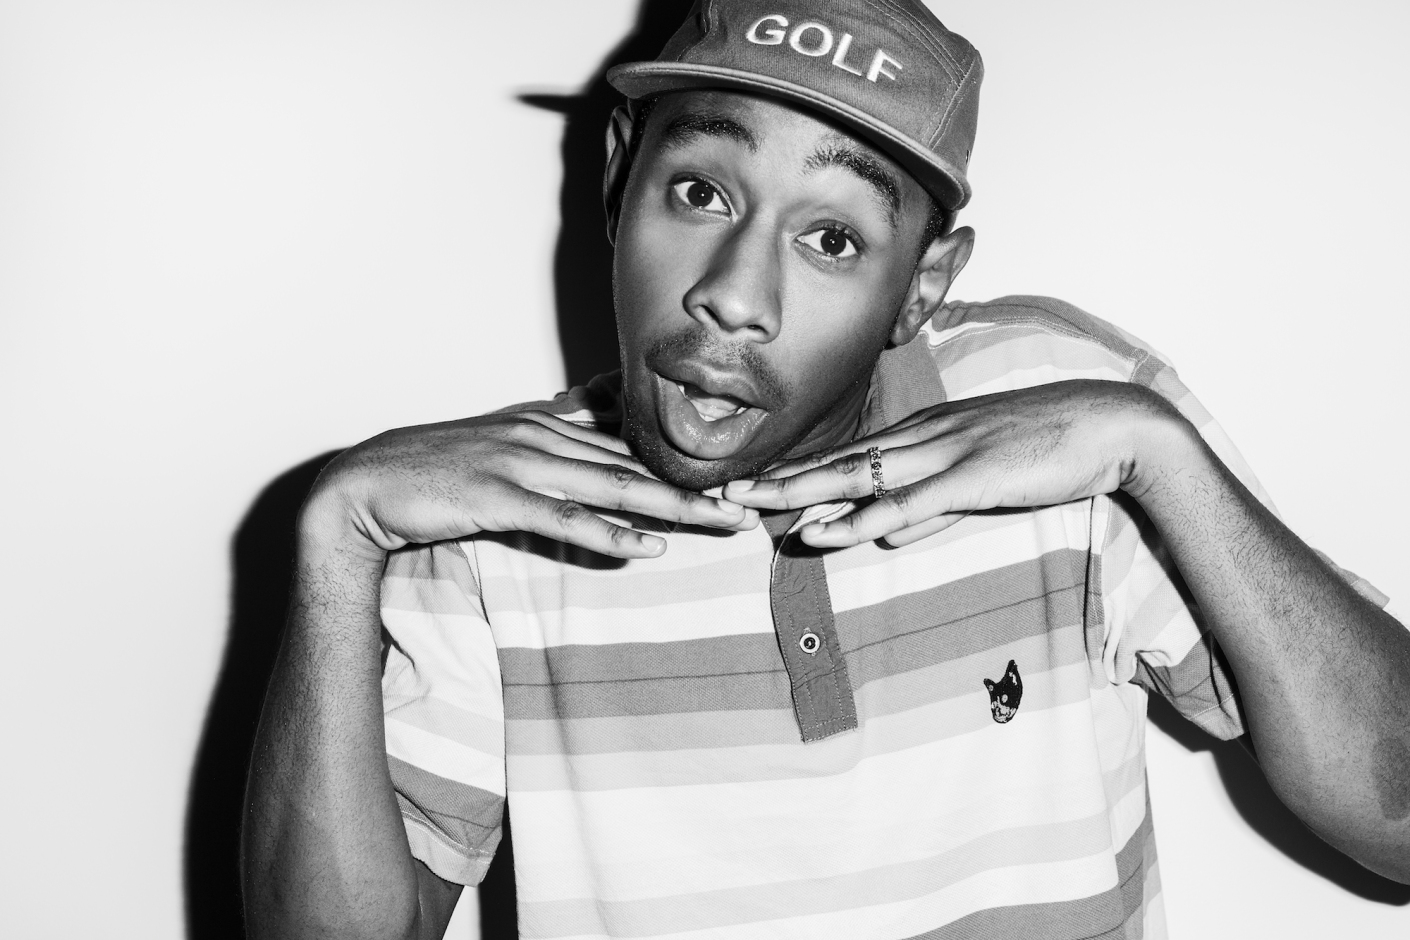 Tyler the Creator responds defiantly to disappointed fan ...